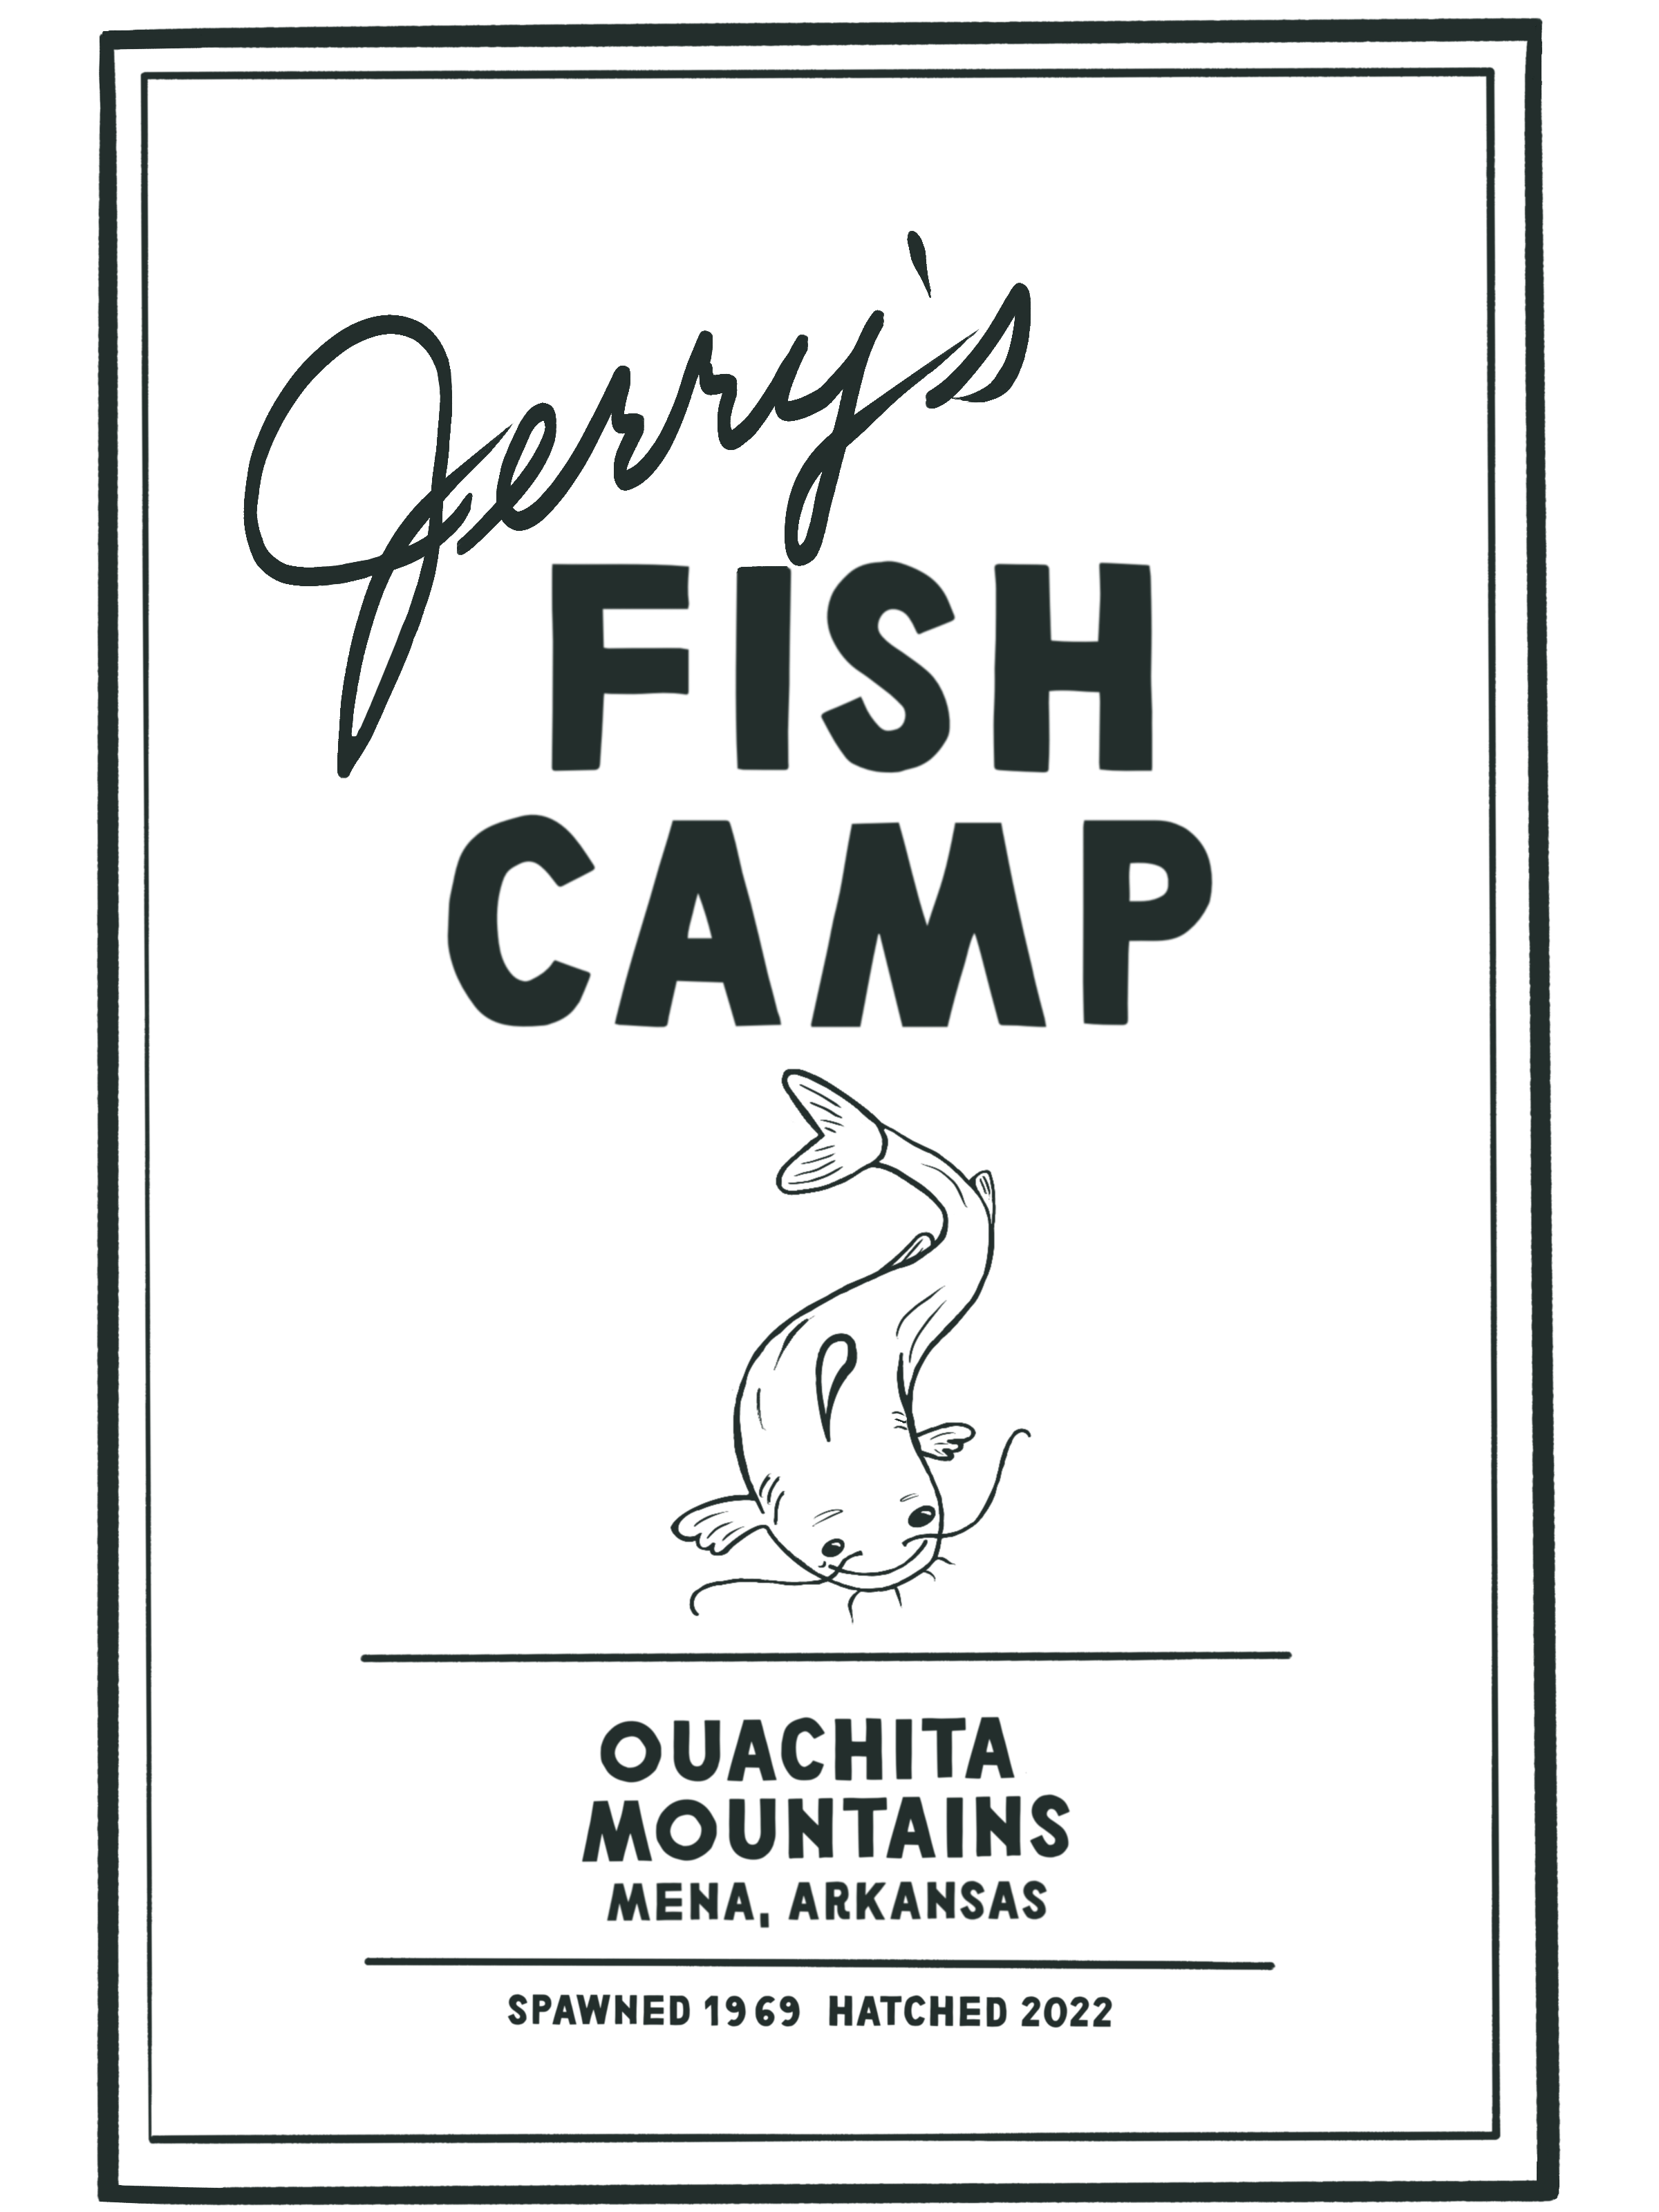 Jerry’s Fish Camp 816 Dequeen St